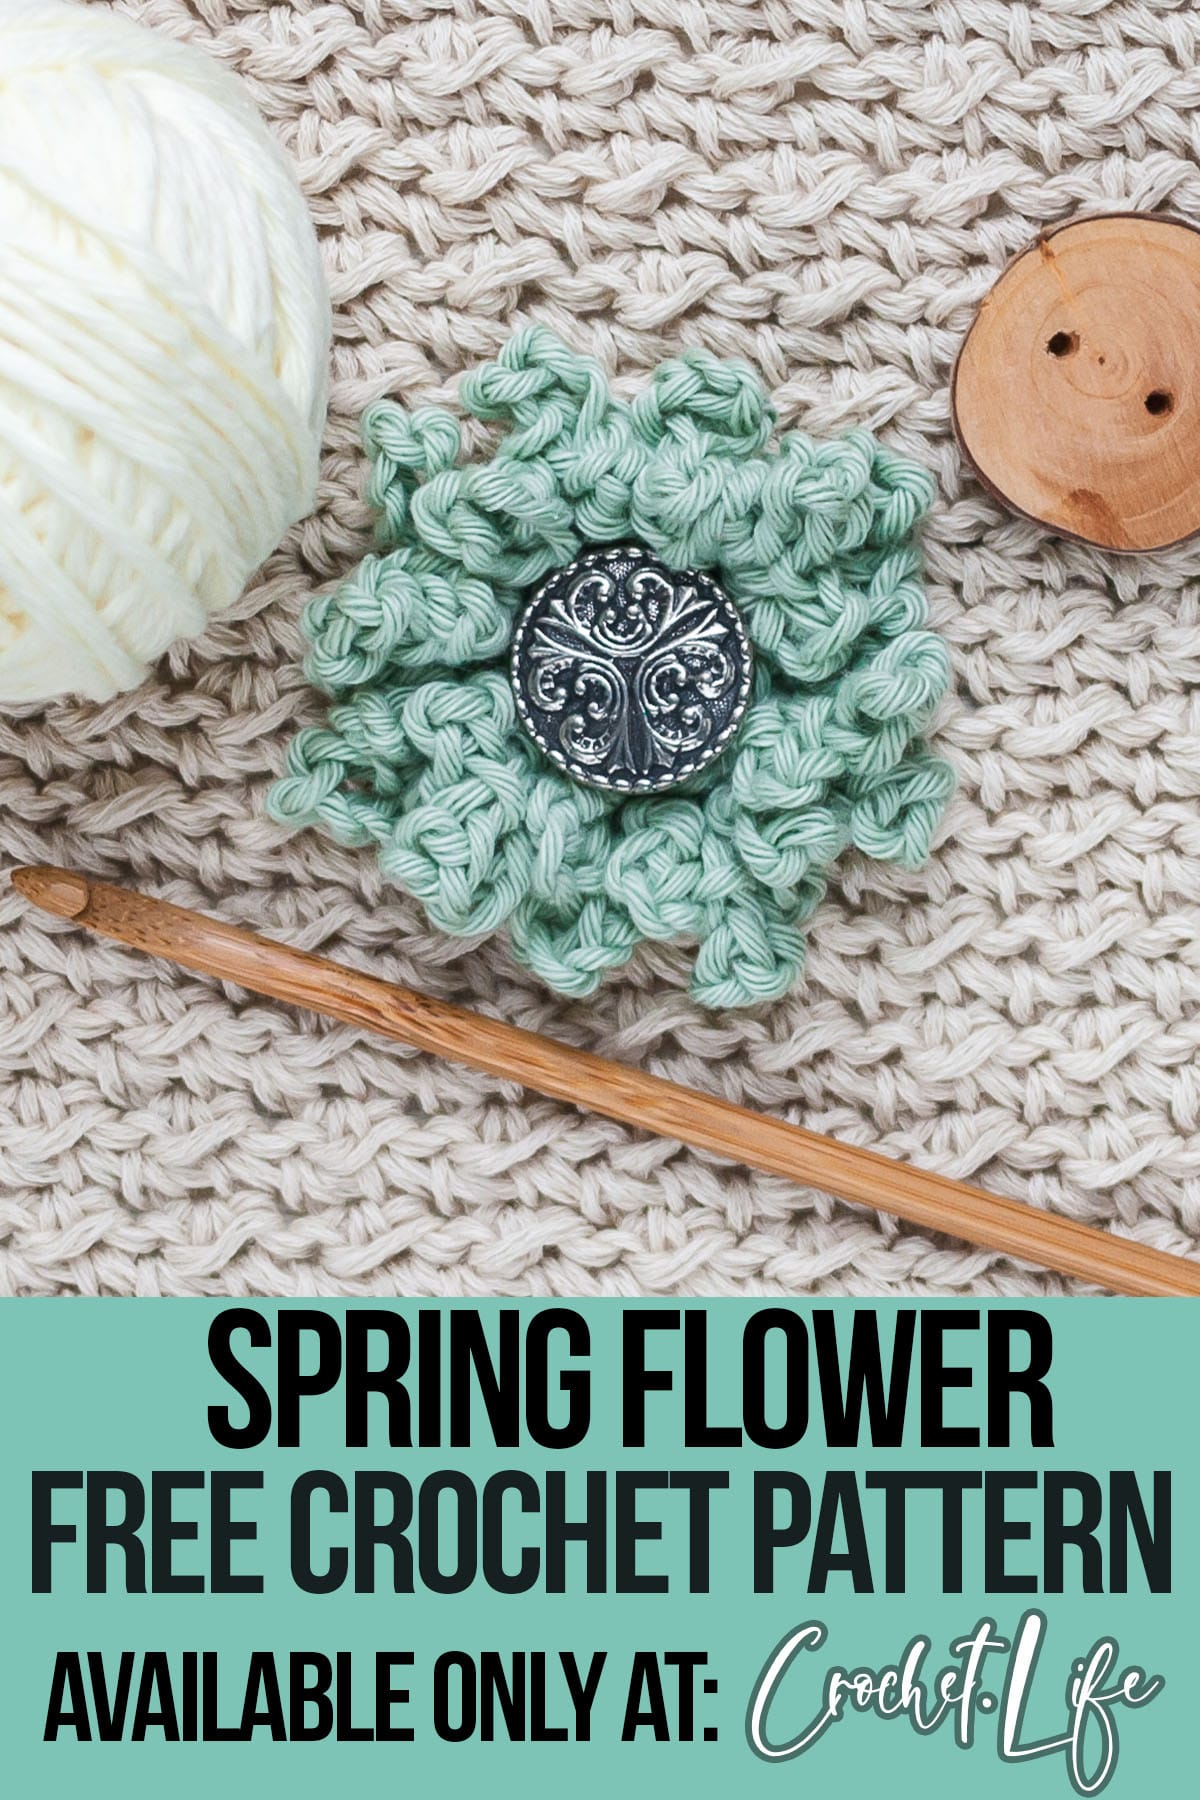 adorable crochet flower pattern with text which reads spring flower free crochet pattern available only at crochet.life